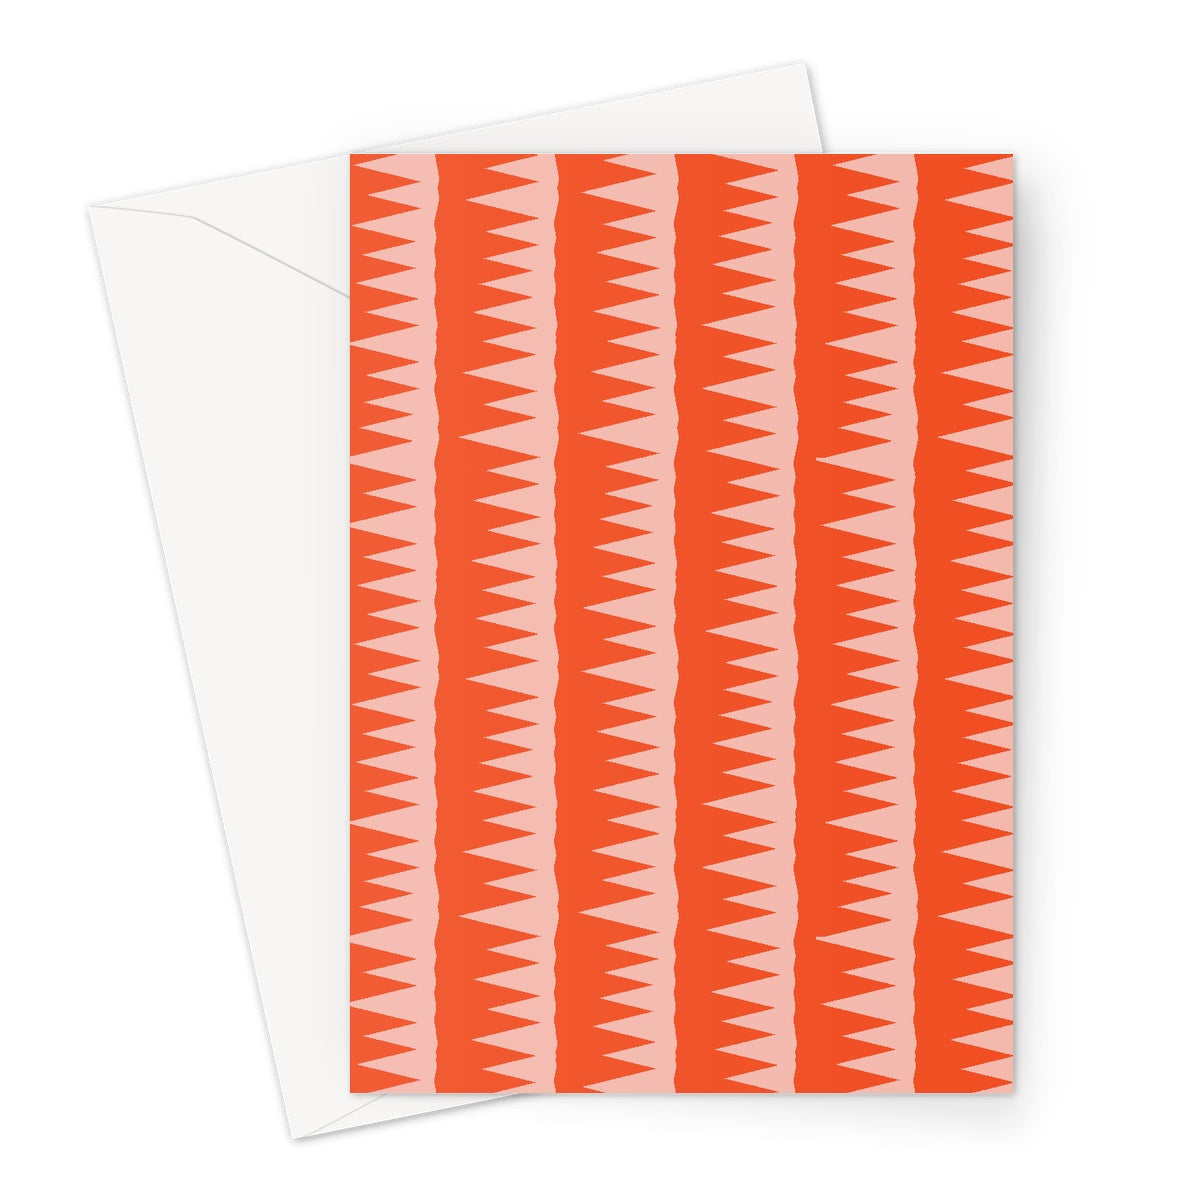 This Mid-Century Modern style art card design consists of colorful pink jagged columns of geometric triangular shapes stacked upon each other like columns against an orange red background